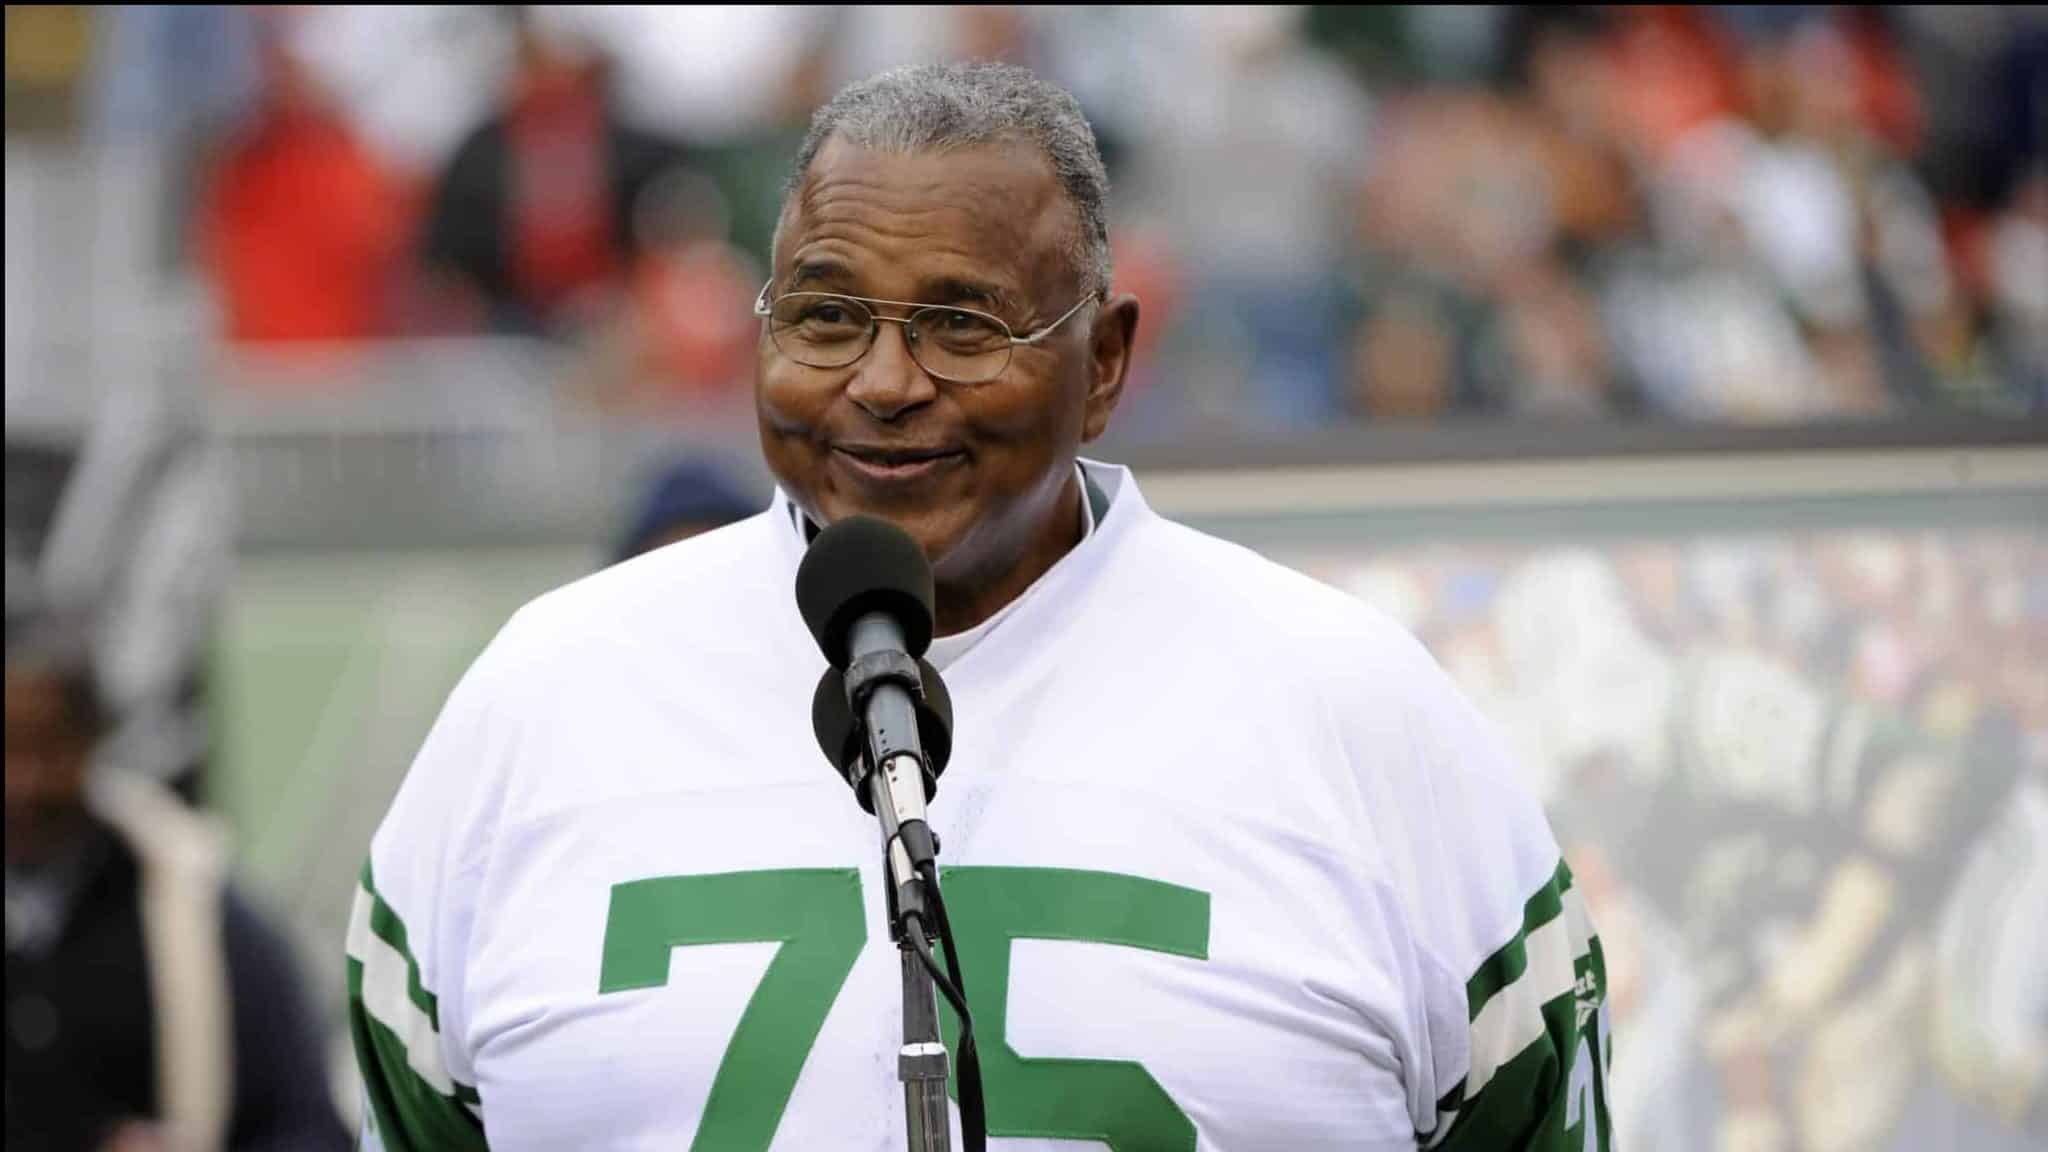 FILE - In this Nov. 1, 2009, file photo, Former New York Jets offensive lineman Winston Hill is honored during halftime of an NFL football game in East Rutherford, N.J. Hill, a durable Pro Bowl offensive tackle who helped protect Joe Namath on the way to the New York Jets' Super Bowl victory in 1969, has died. He was 74. The team announced Tuesday, April 26, 2016, that Hill died in his adopted hometown of Denver.